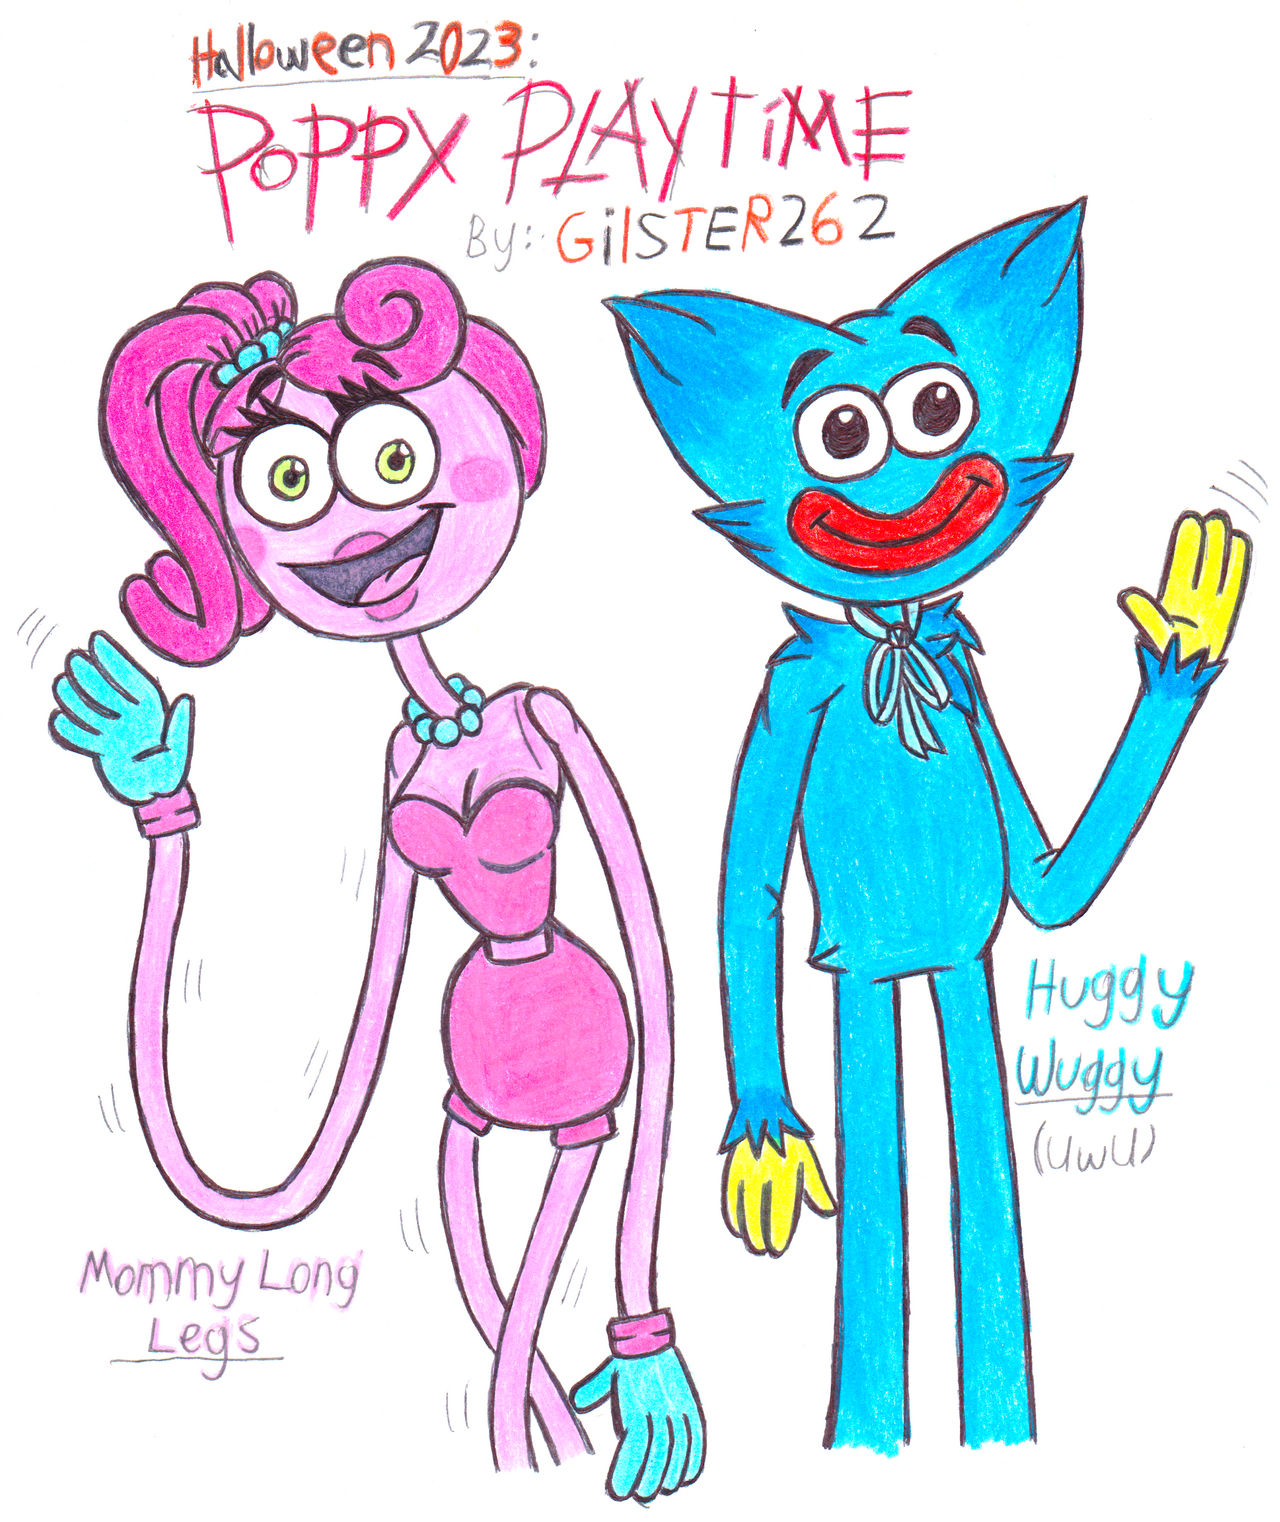 Geremy(G) and poppy(P) in 2023